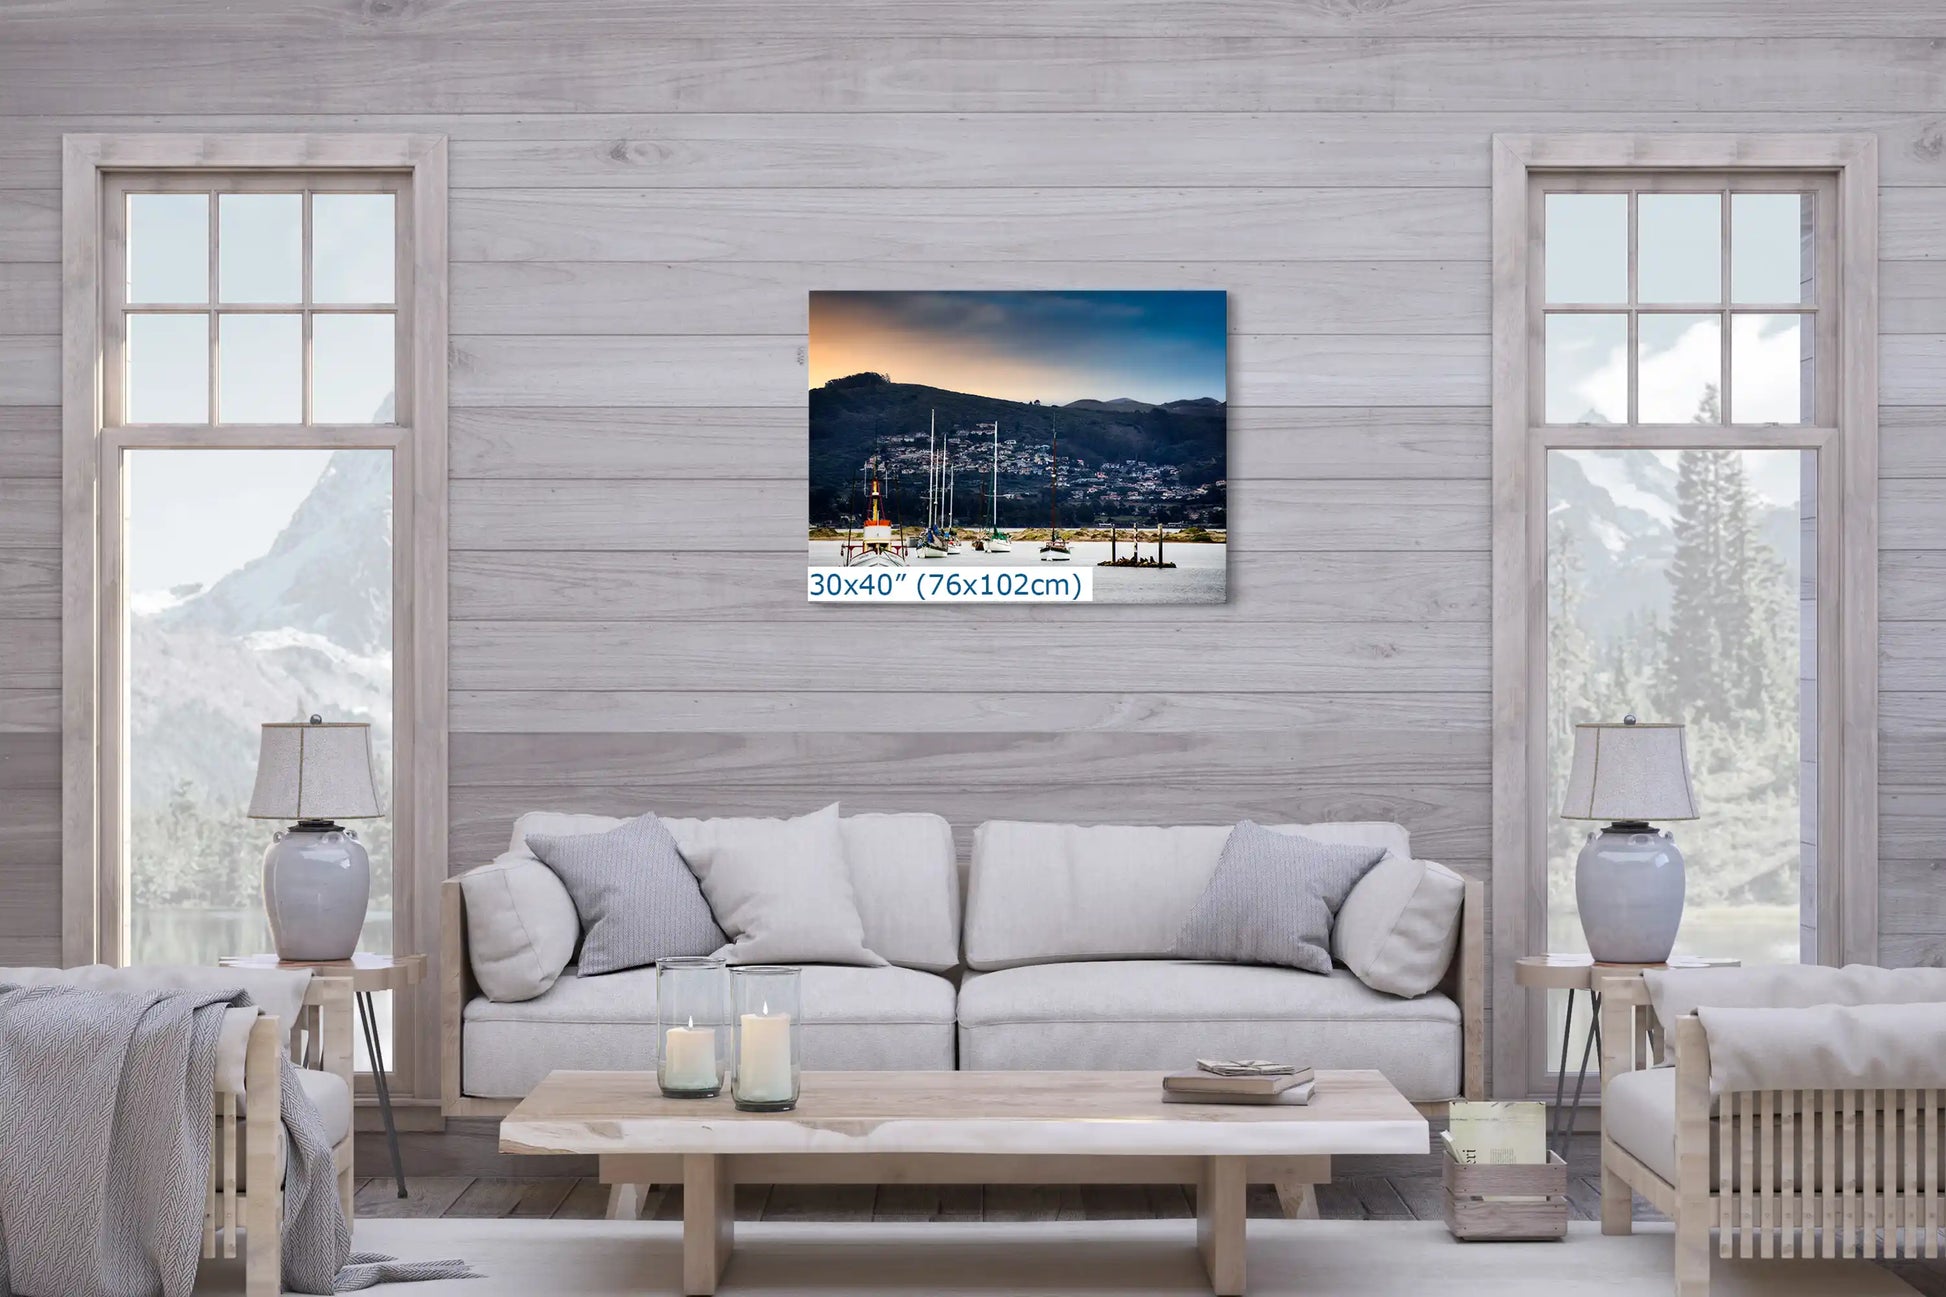 Morro Bay's serene harbor, captured in a 30x40 canvas, anchors a living room with its vibrant, awe-inspiring presence.